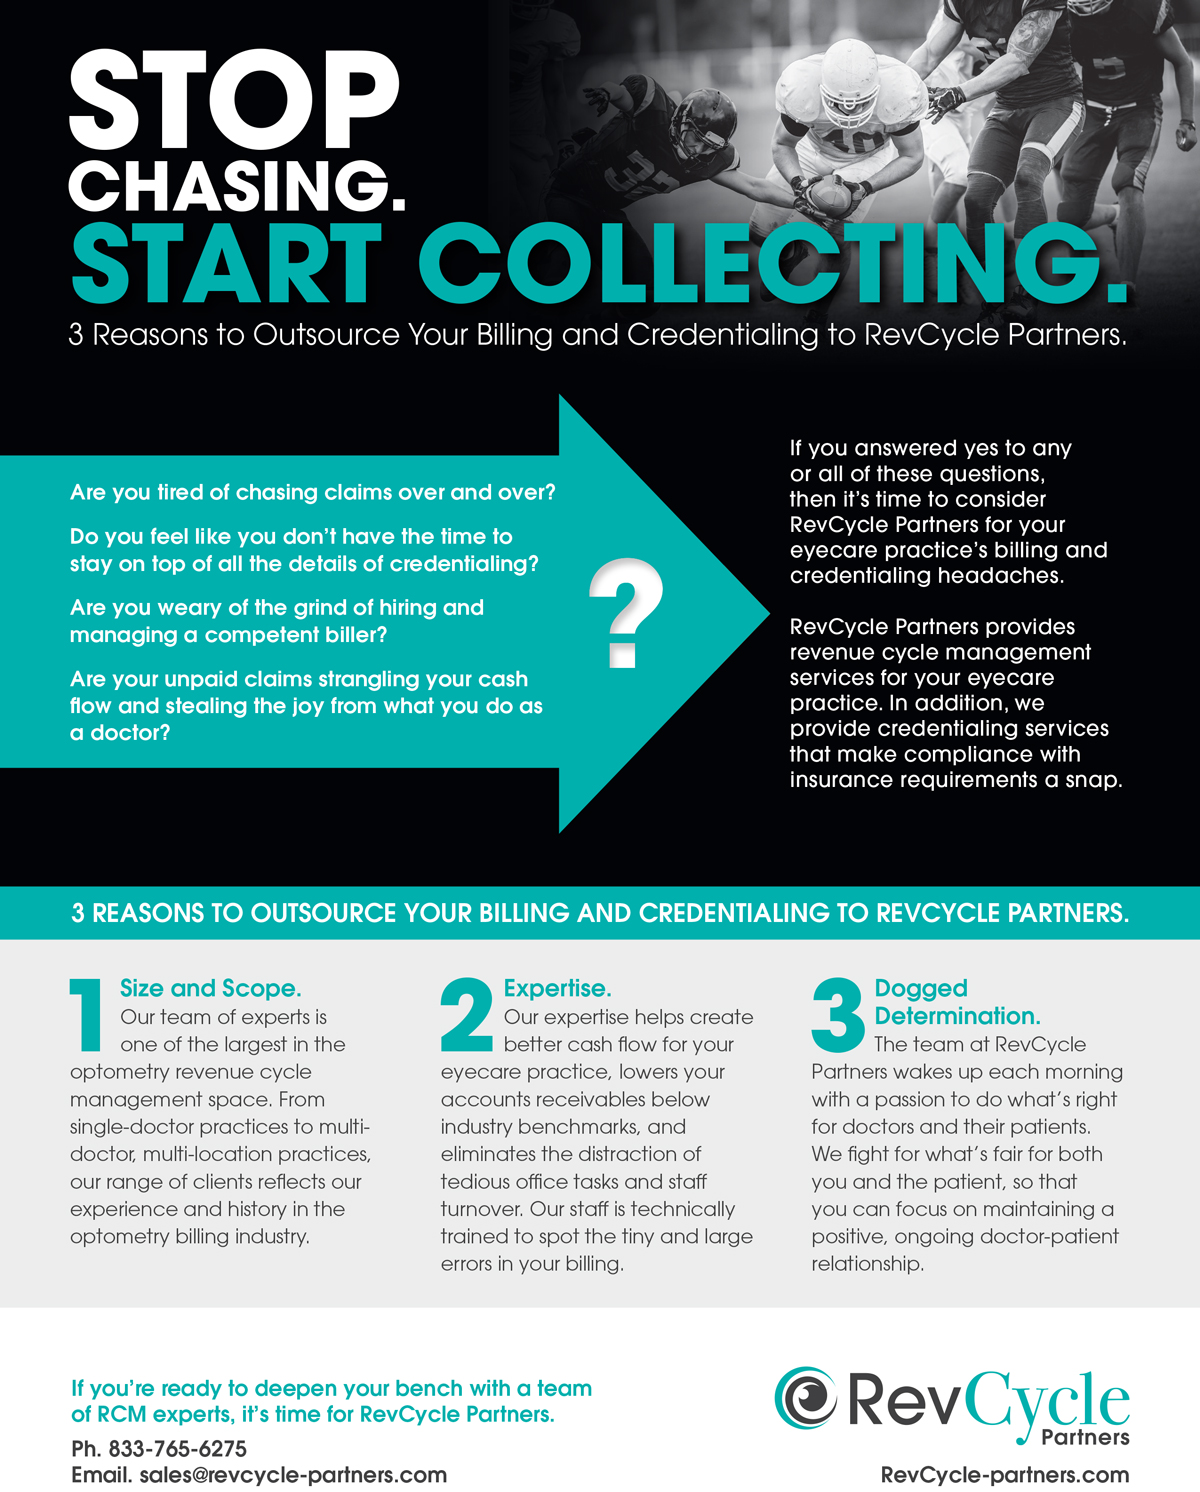 Fast Facts: 3 reasons to outsource your billing and credentialing to RevCycle Partners.